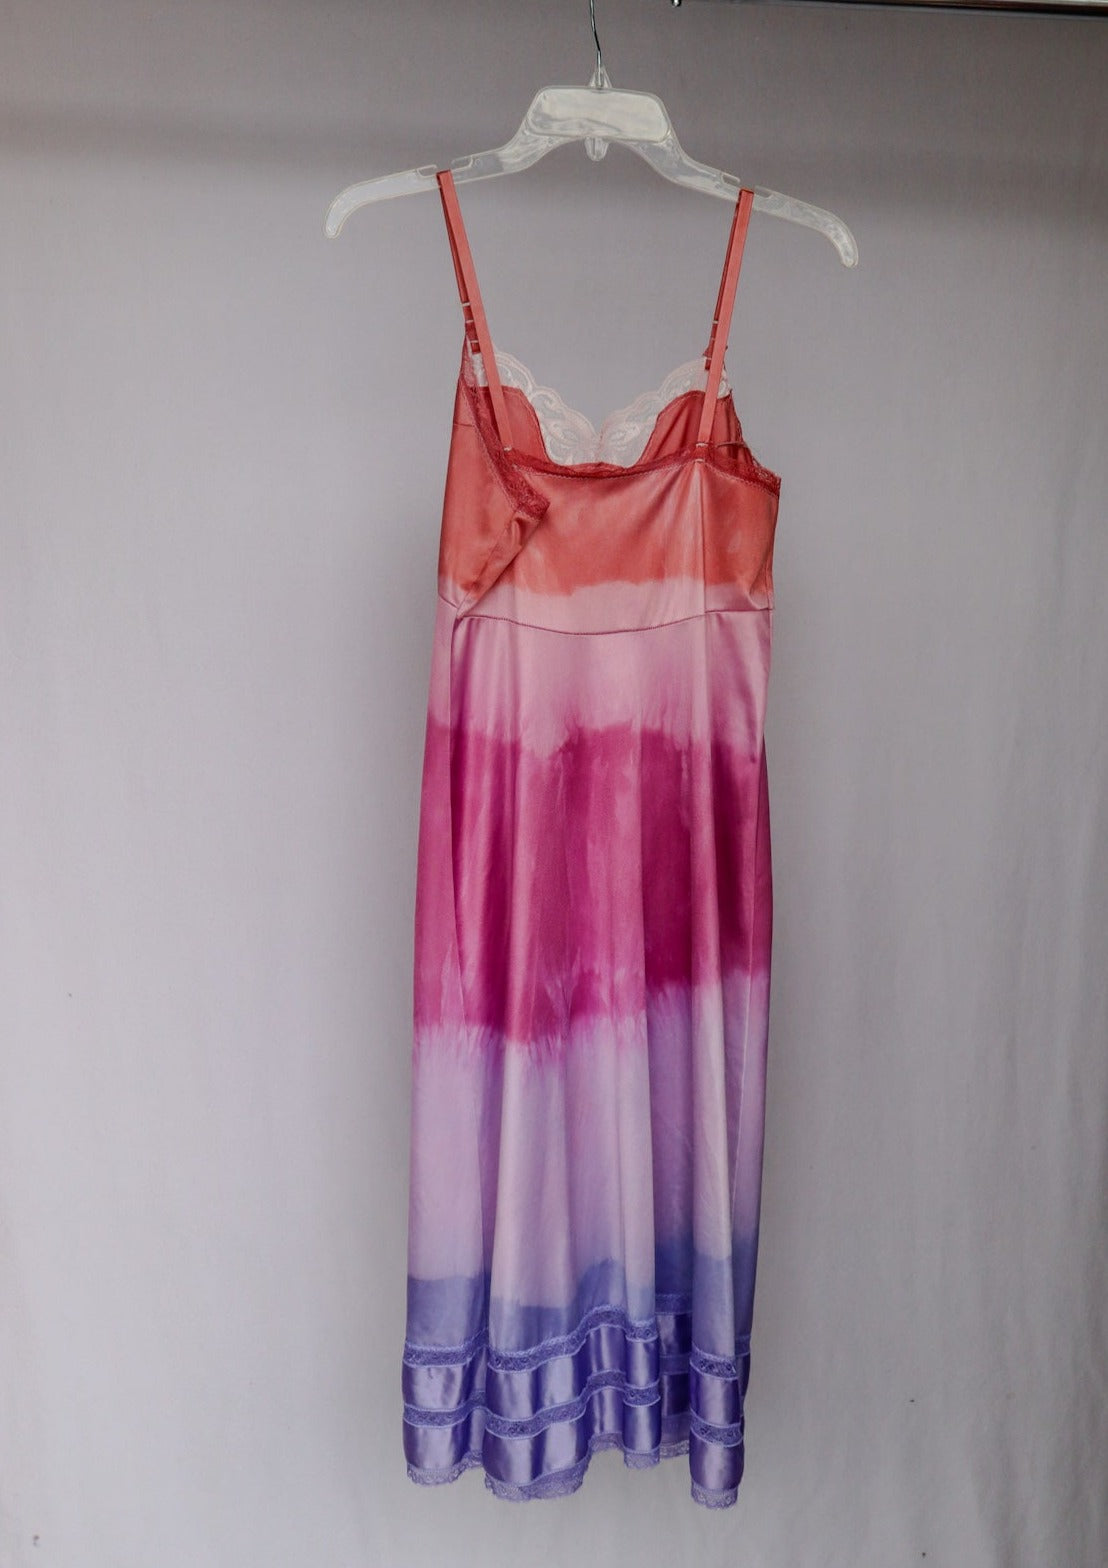 1 OF 1 CUSTOM DYED OMBRE DRESS